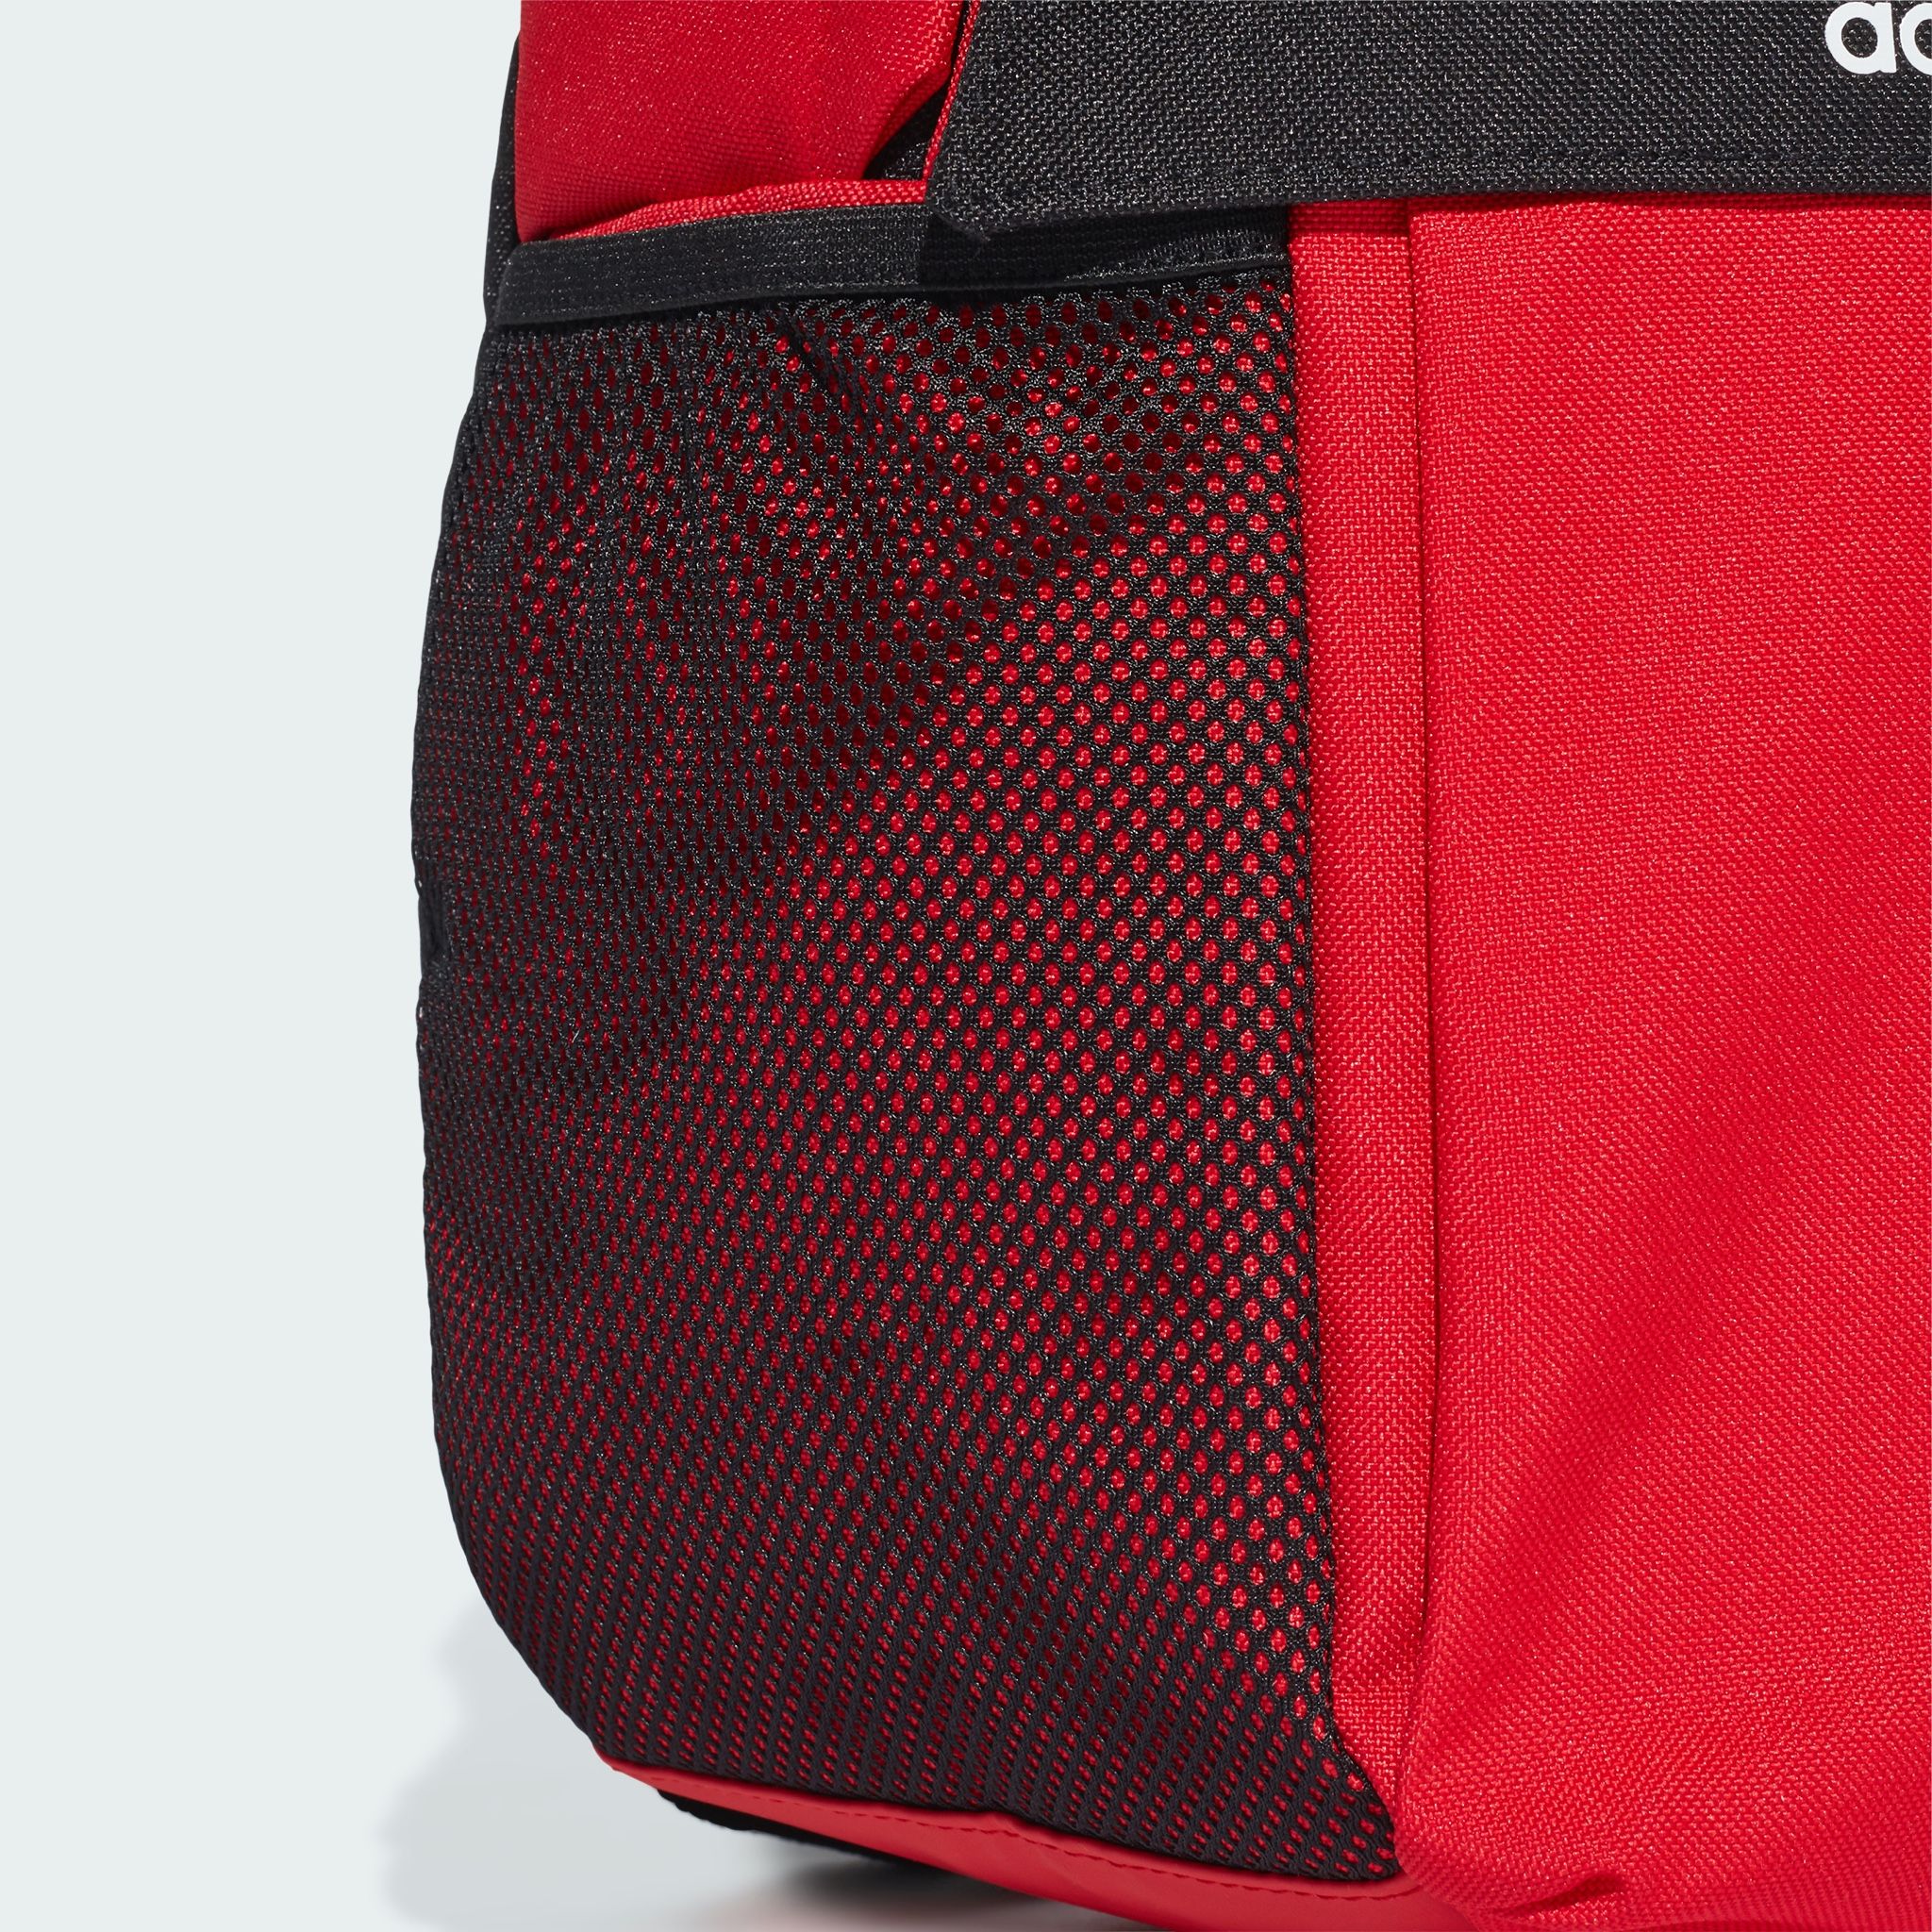  adidas Classic Backpack 'Red' 